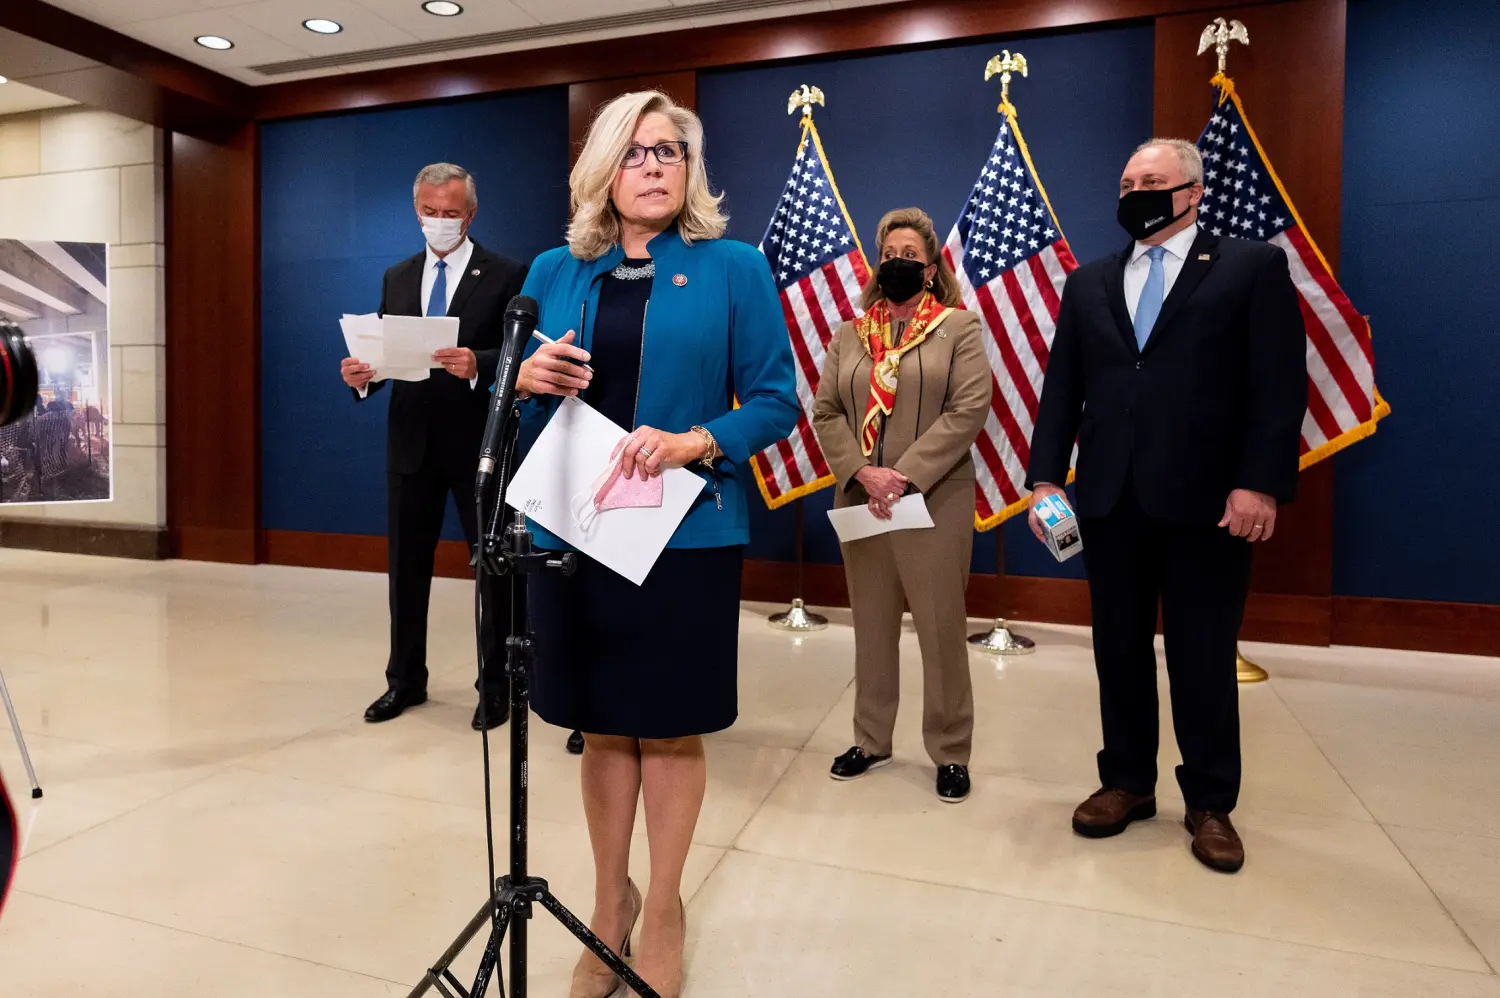 April 14, 2021 - Washington, DC, United States: U.S. Representative Liz Cheney (R-WY) speaking at the post GOP House conference meeting press conference. (Photo by Michael Brochstein/Sipa USA)No Use Germany.